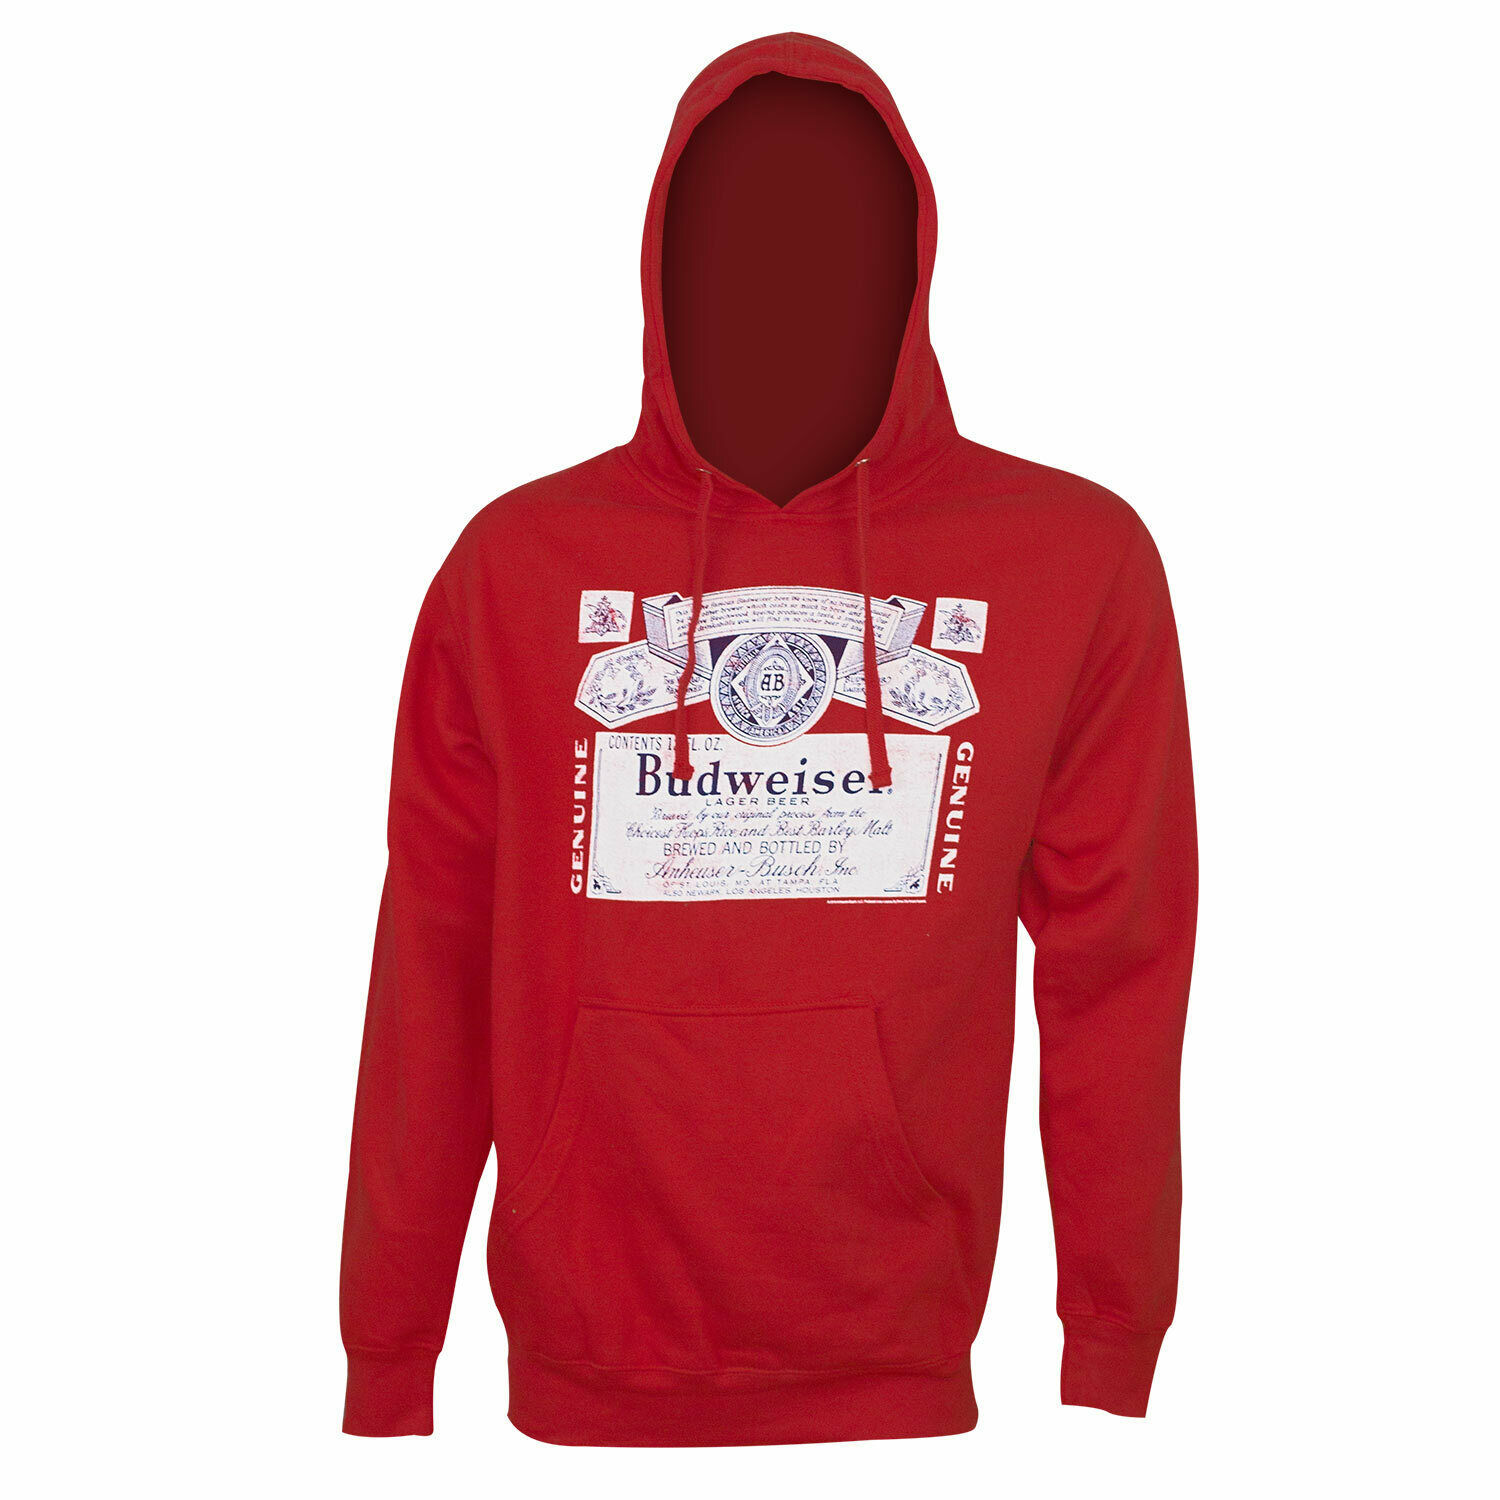 Primary image for Budweiser Classic Label Hoodie Sweatshirt Red